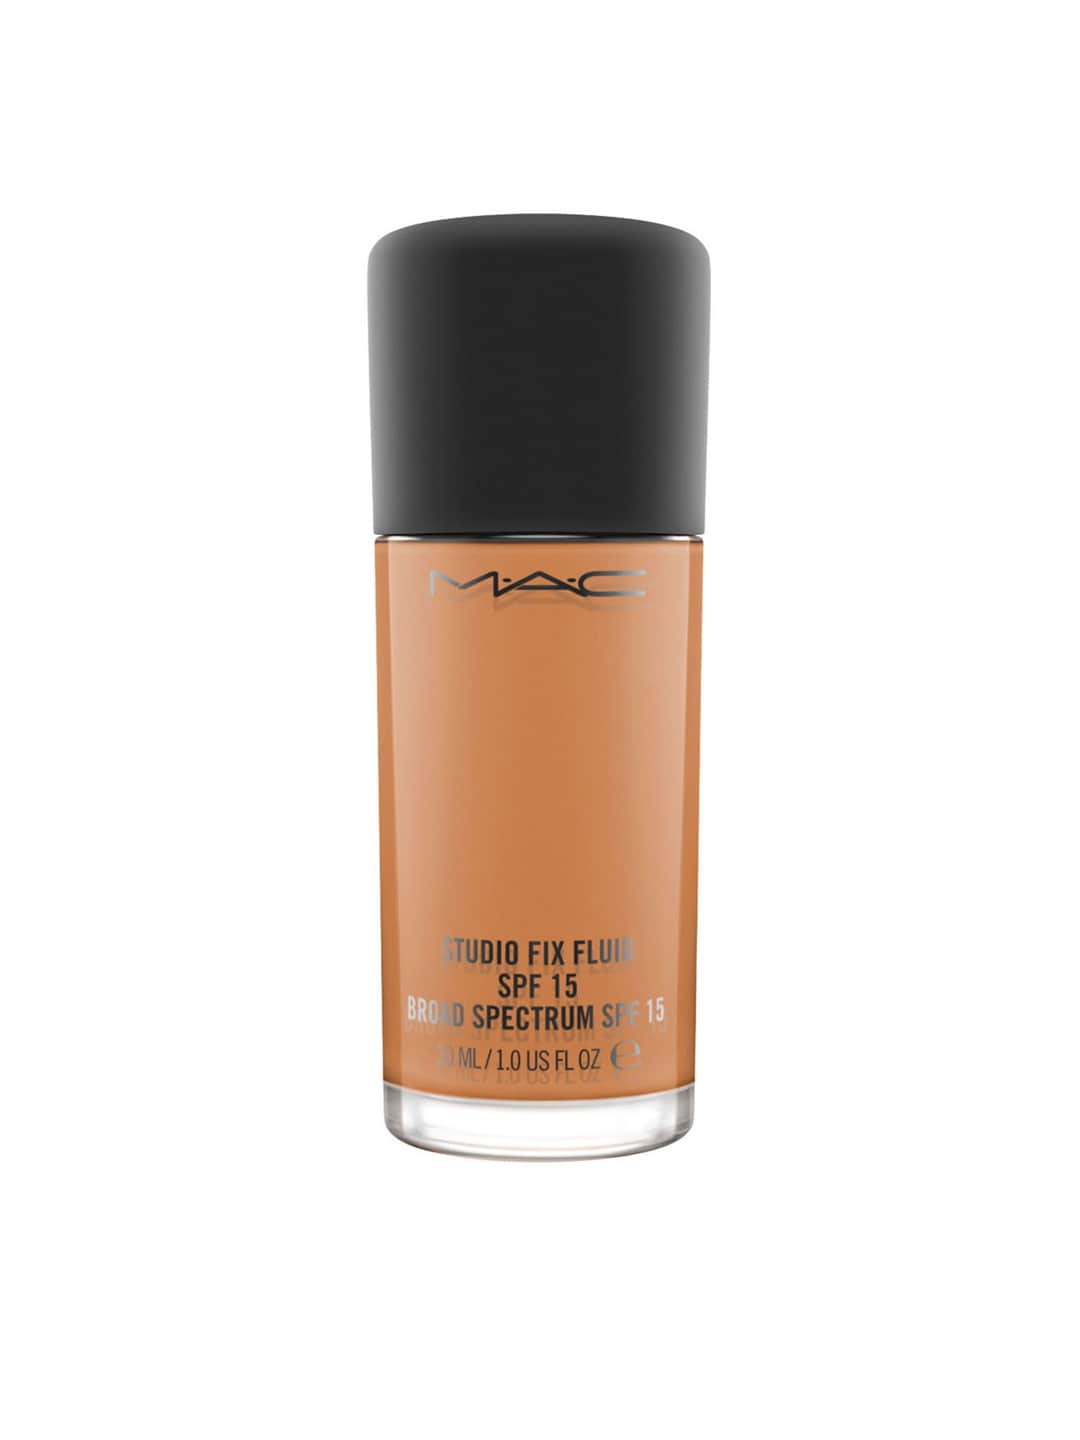 M.A.C Studio Fix Fluid Broad Spectrum Foundation with SPF 15 - NW45 30ml Price in India